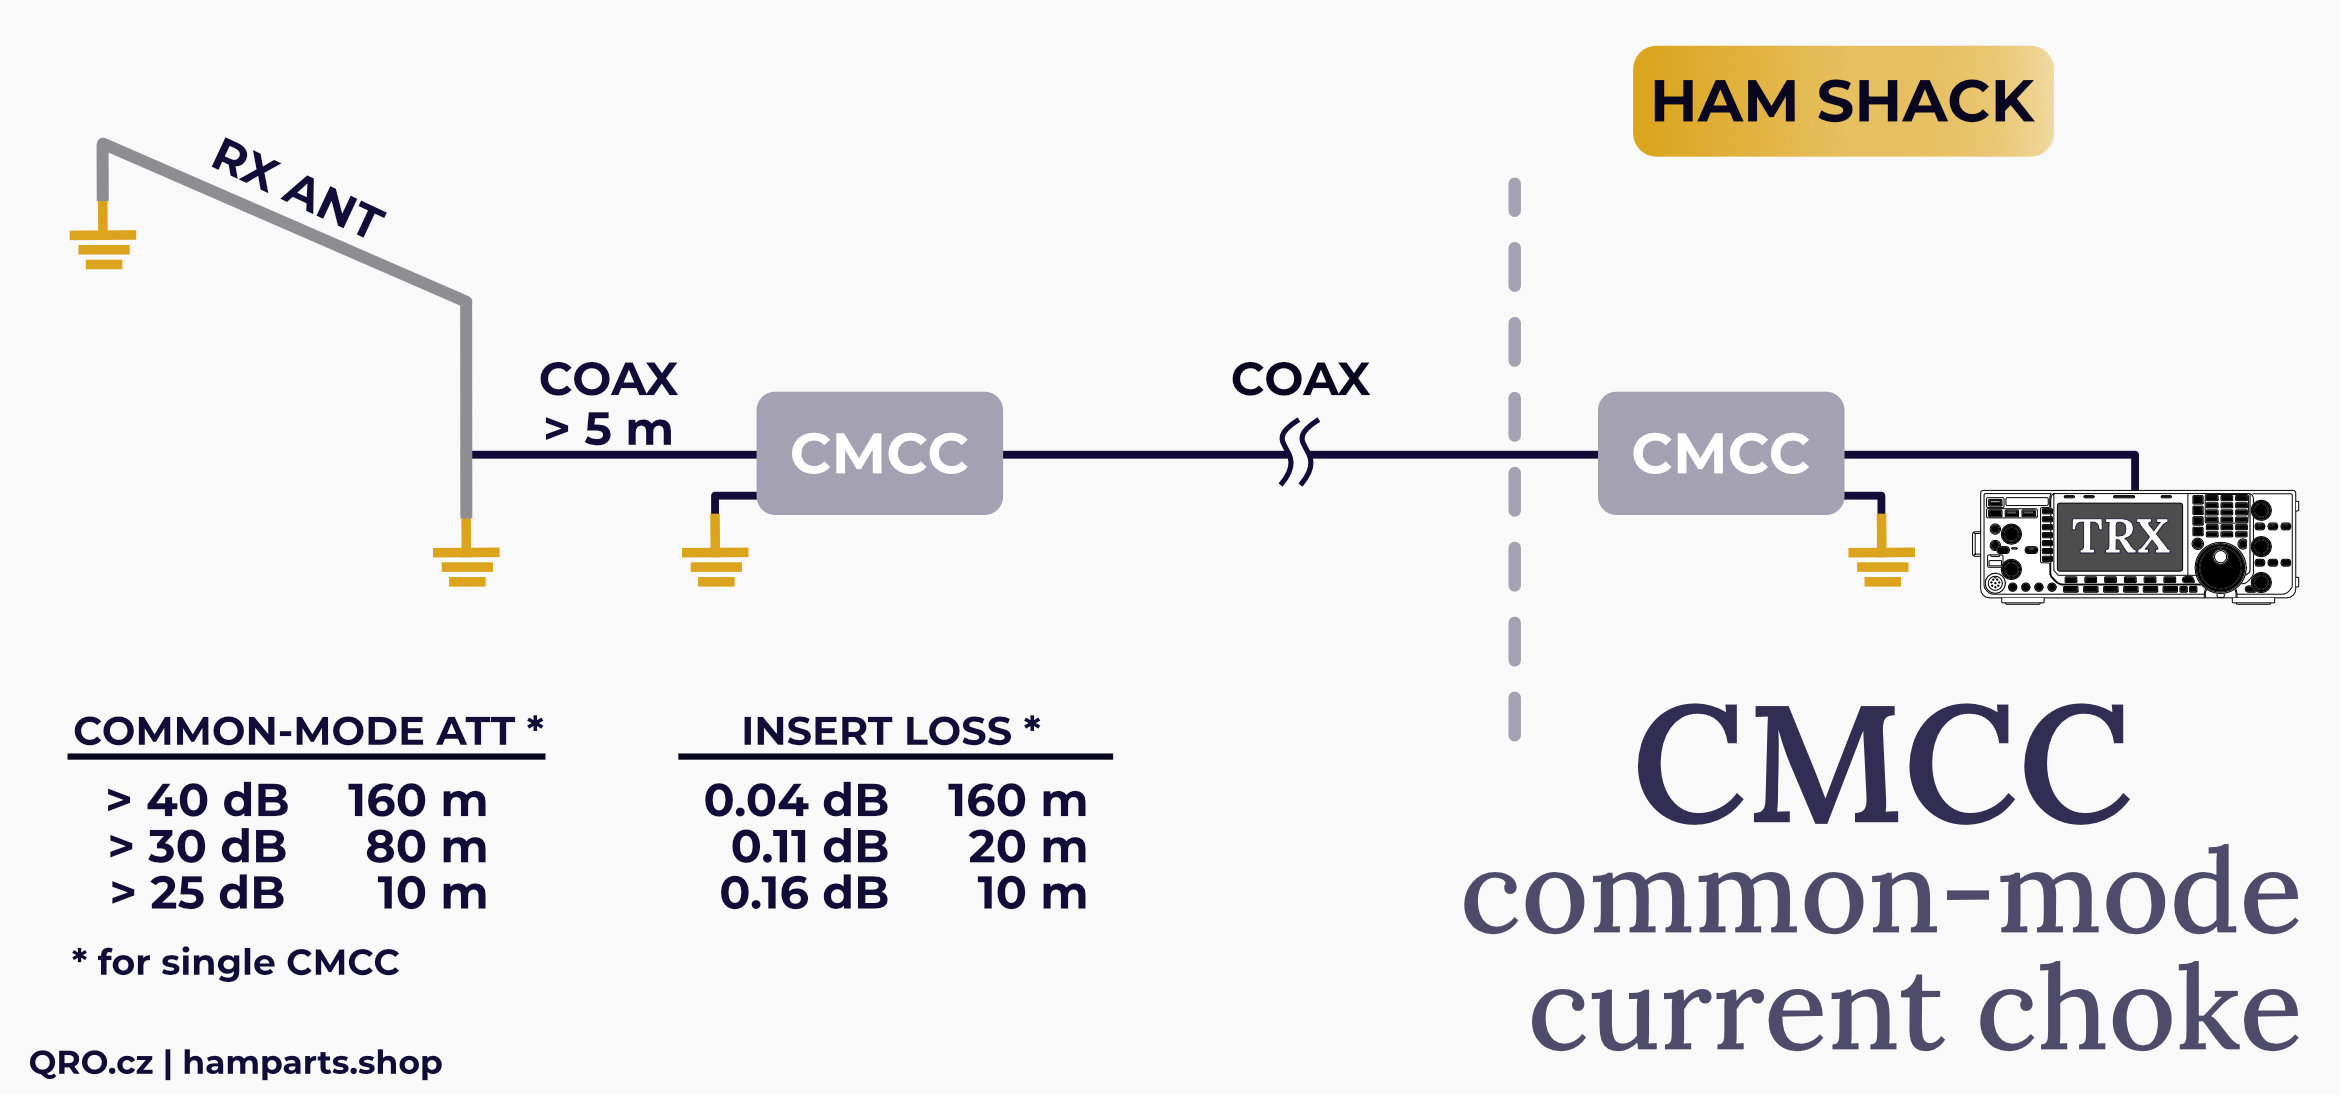 cmcc common mode current choke to ham shack by qro.cz hamparts.shop